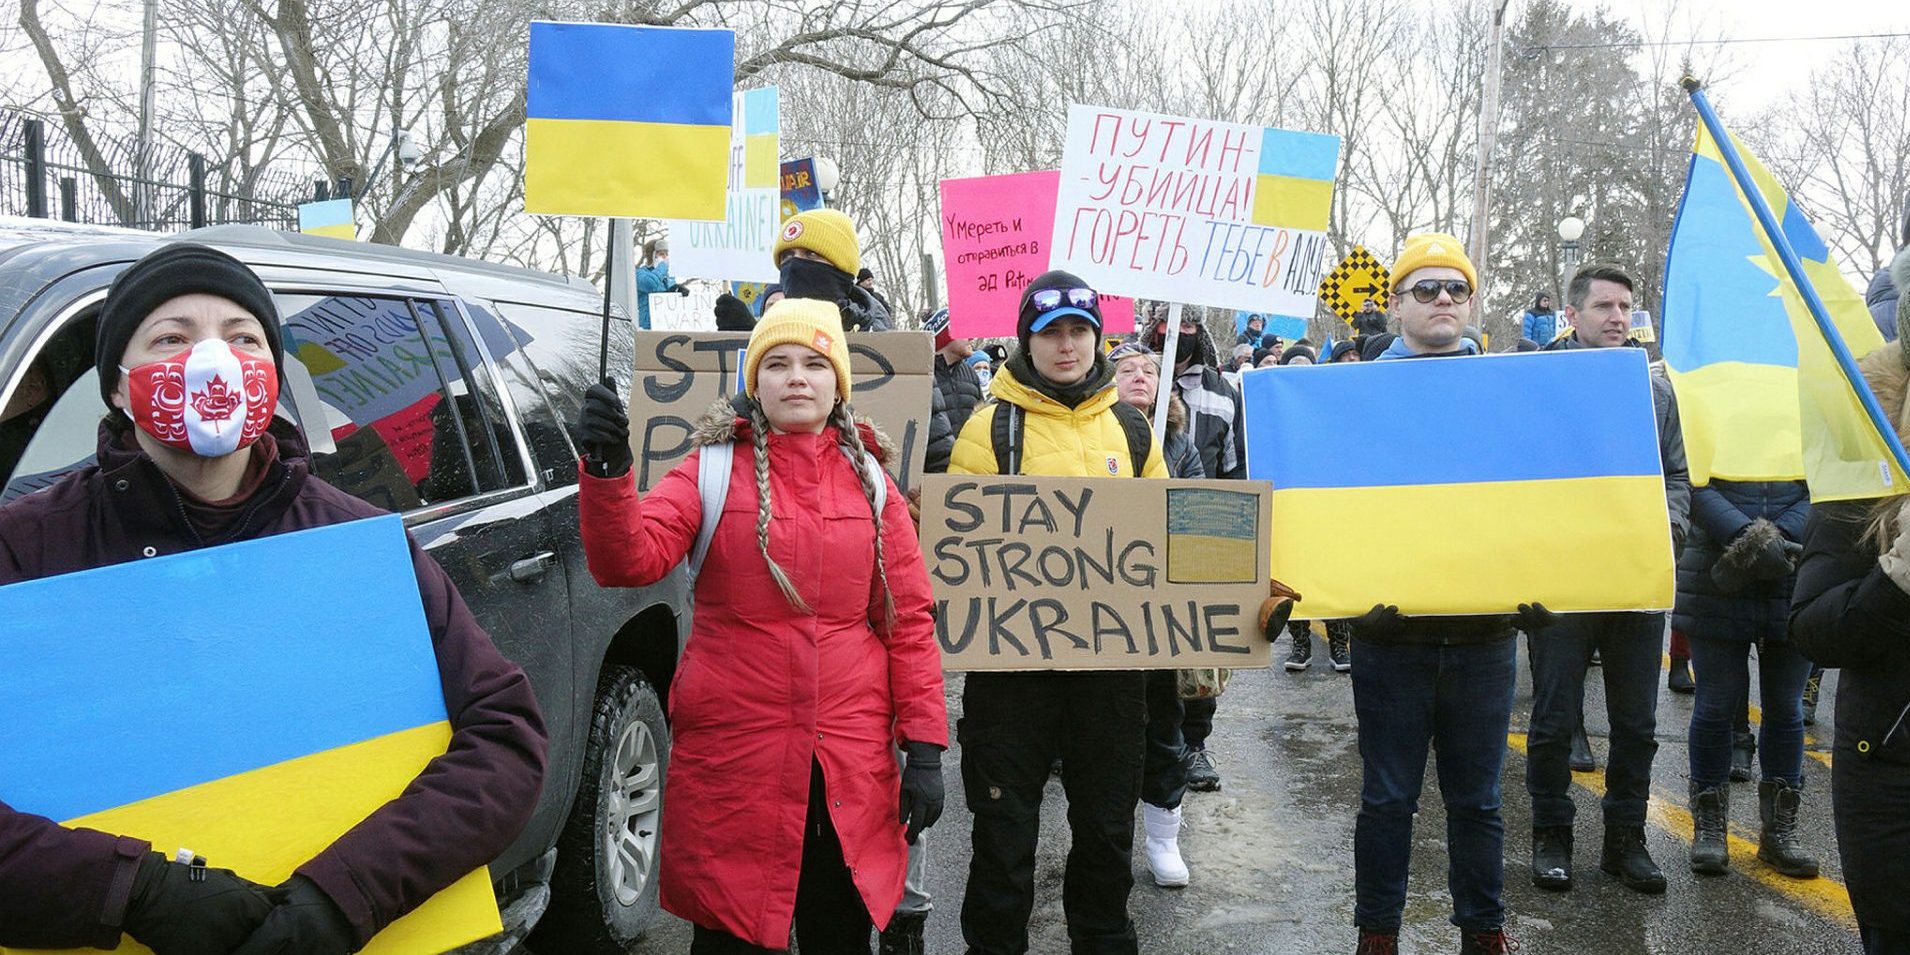 A rally in support of Ukraine takes place in front of the Russian Embassy in Ottawa on Feb. 27, 2022. The Hill Times photograph by Sam Garcia